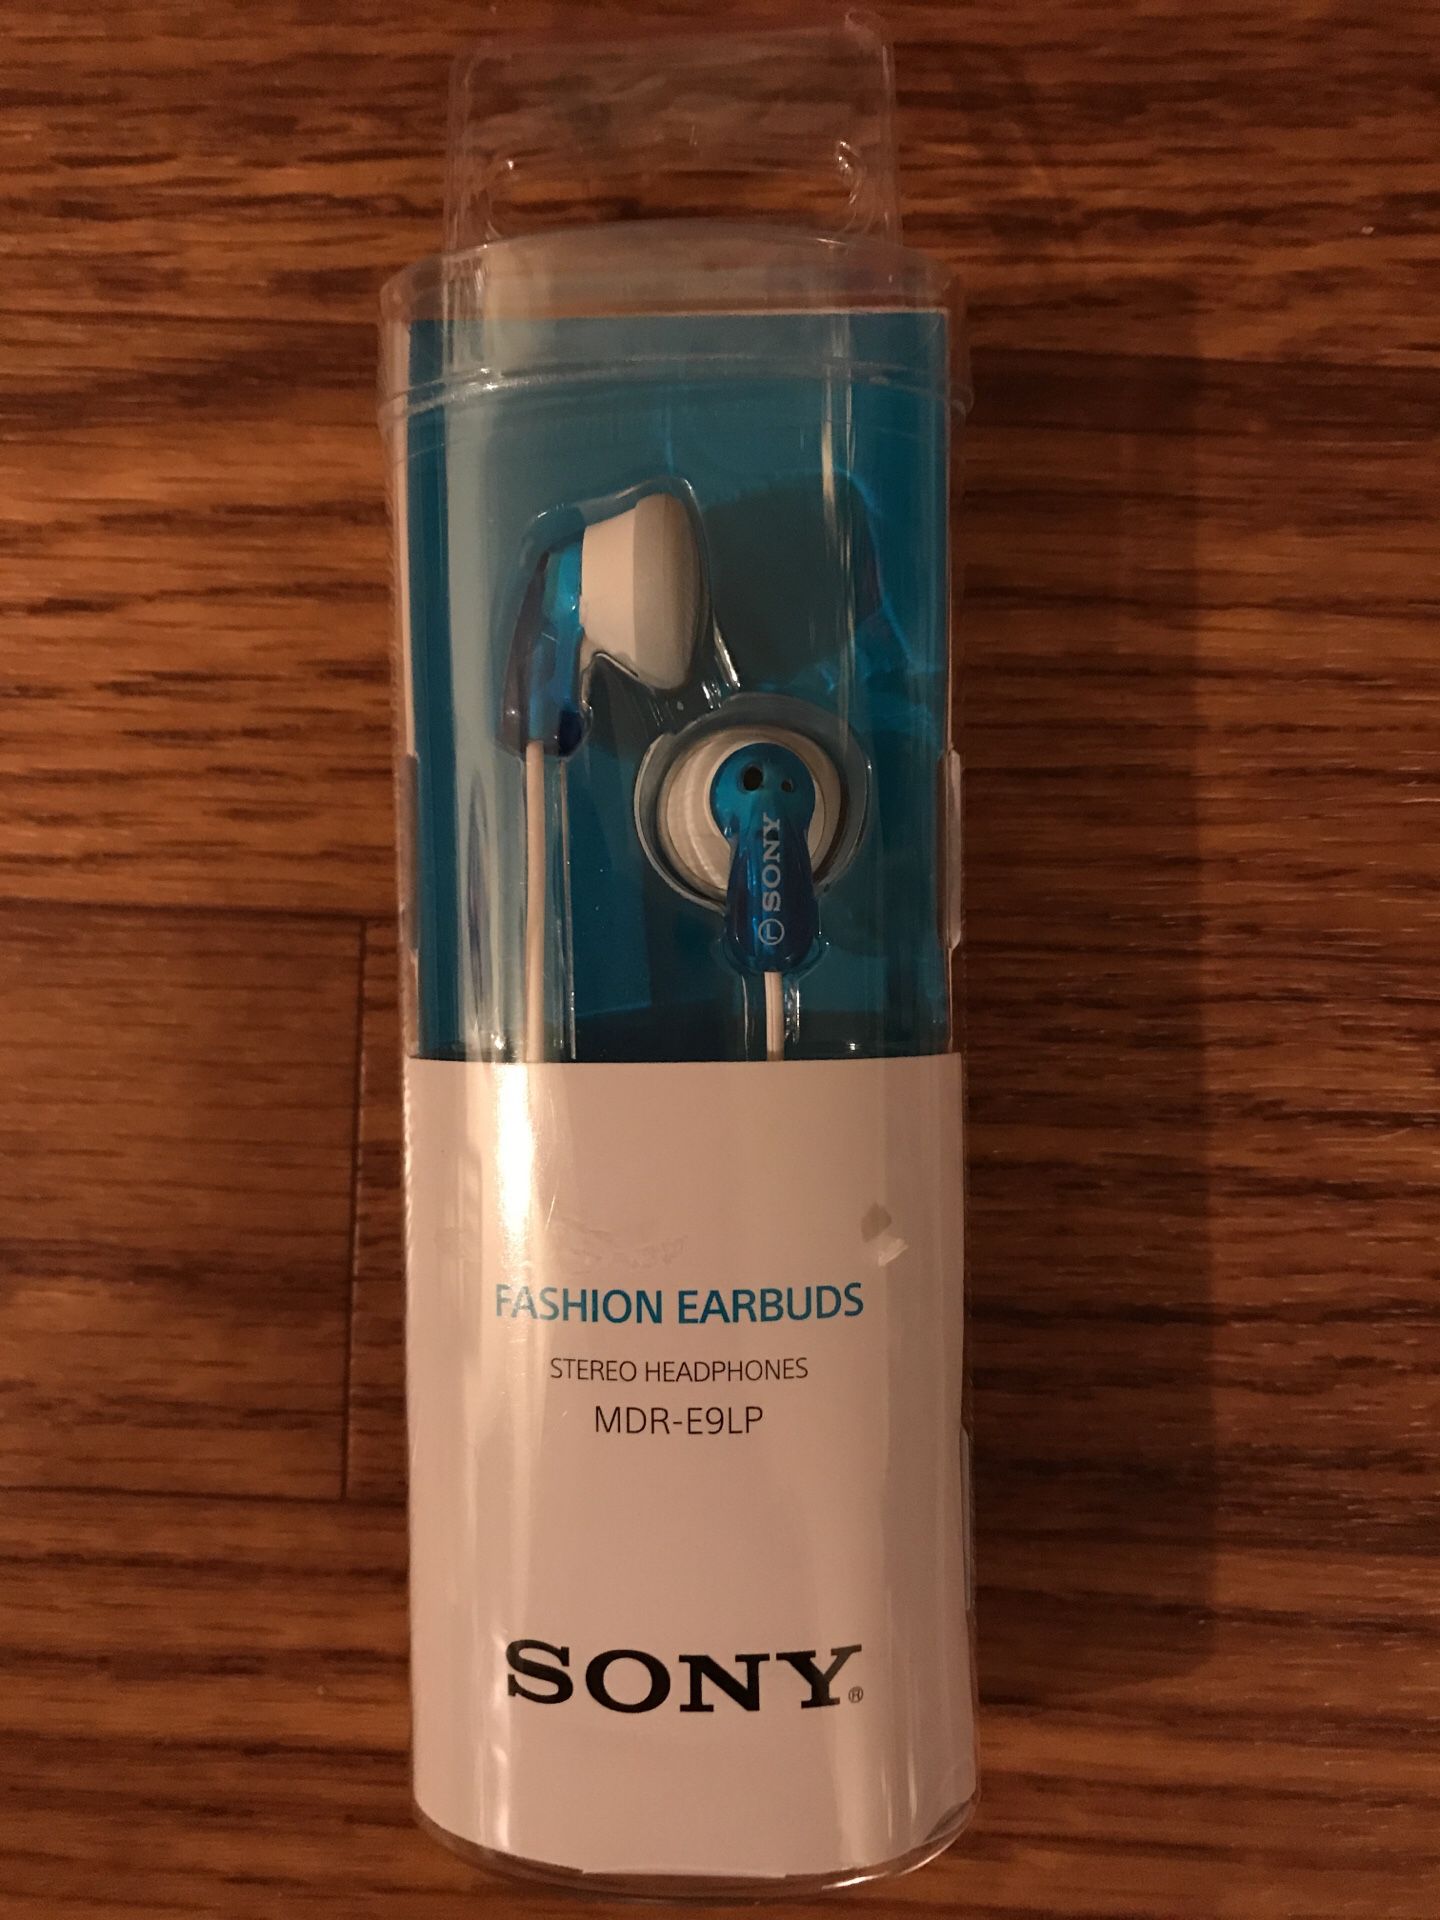 Fashion Earbuds / stereo Headphone SONY/ open box never used